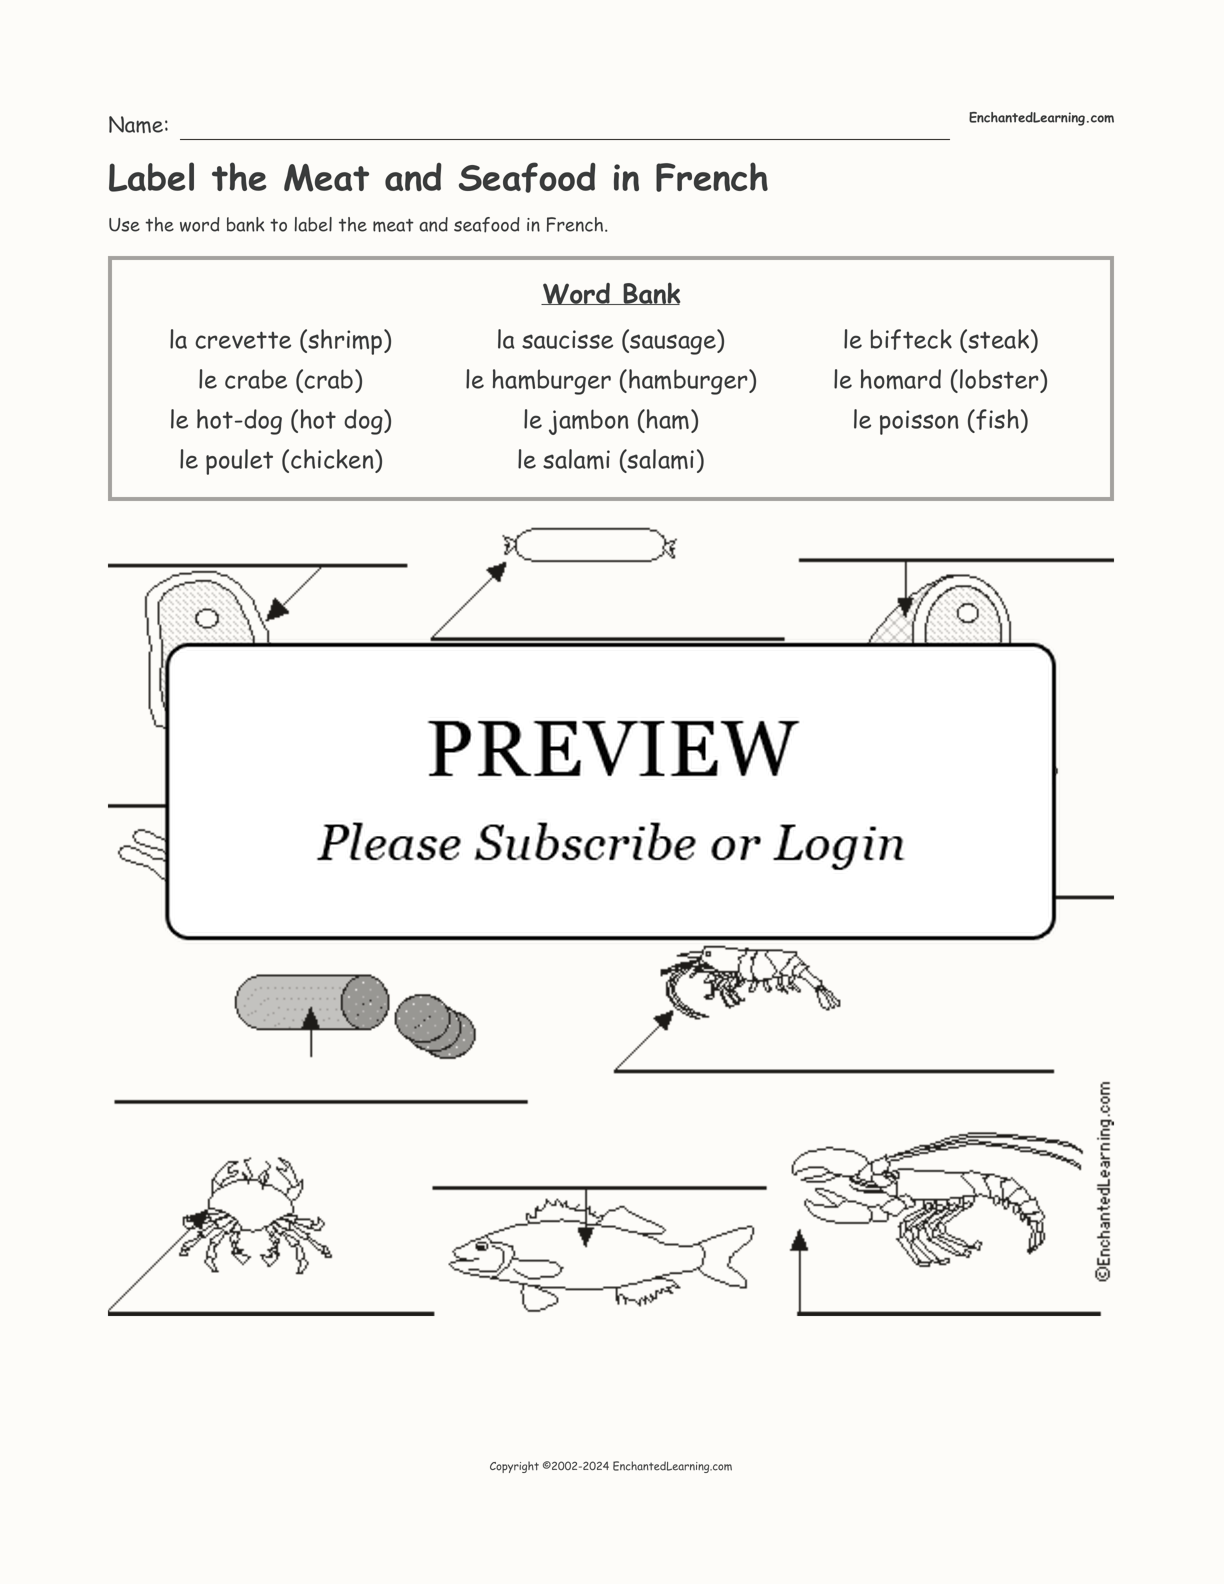 Label the Meat and Seafood in French interactive worksheet page 1